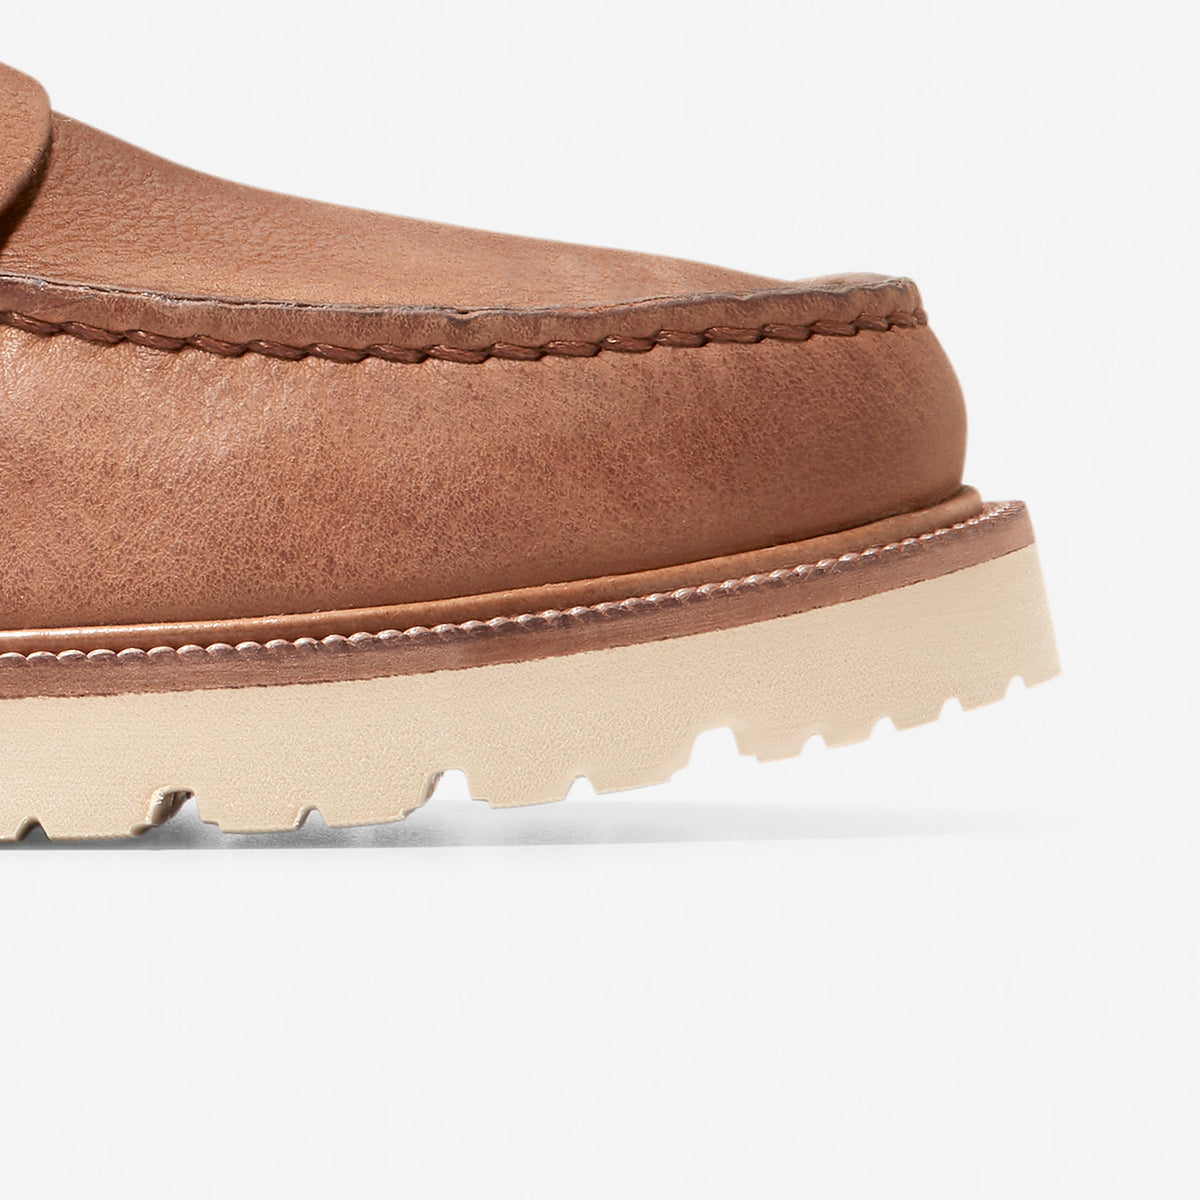 American Classics Penny Loafer